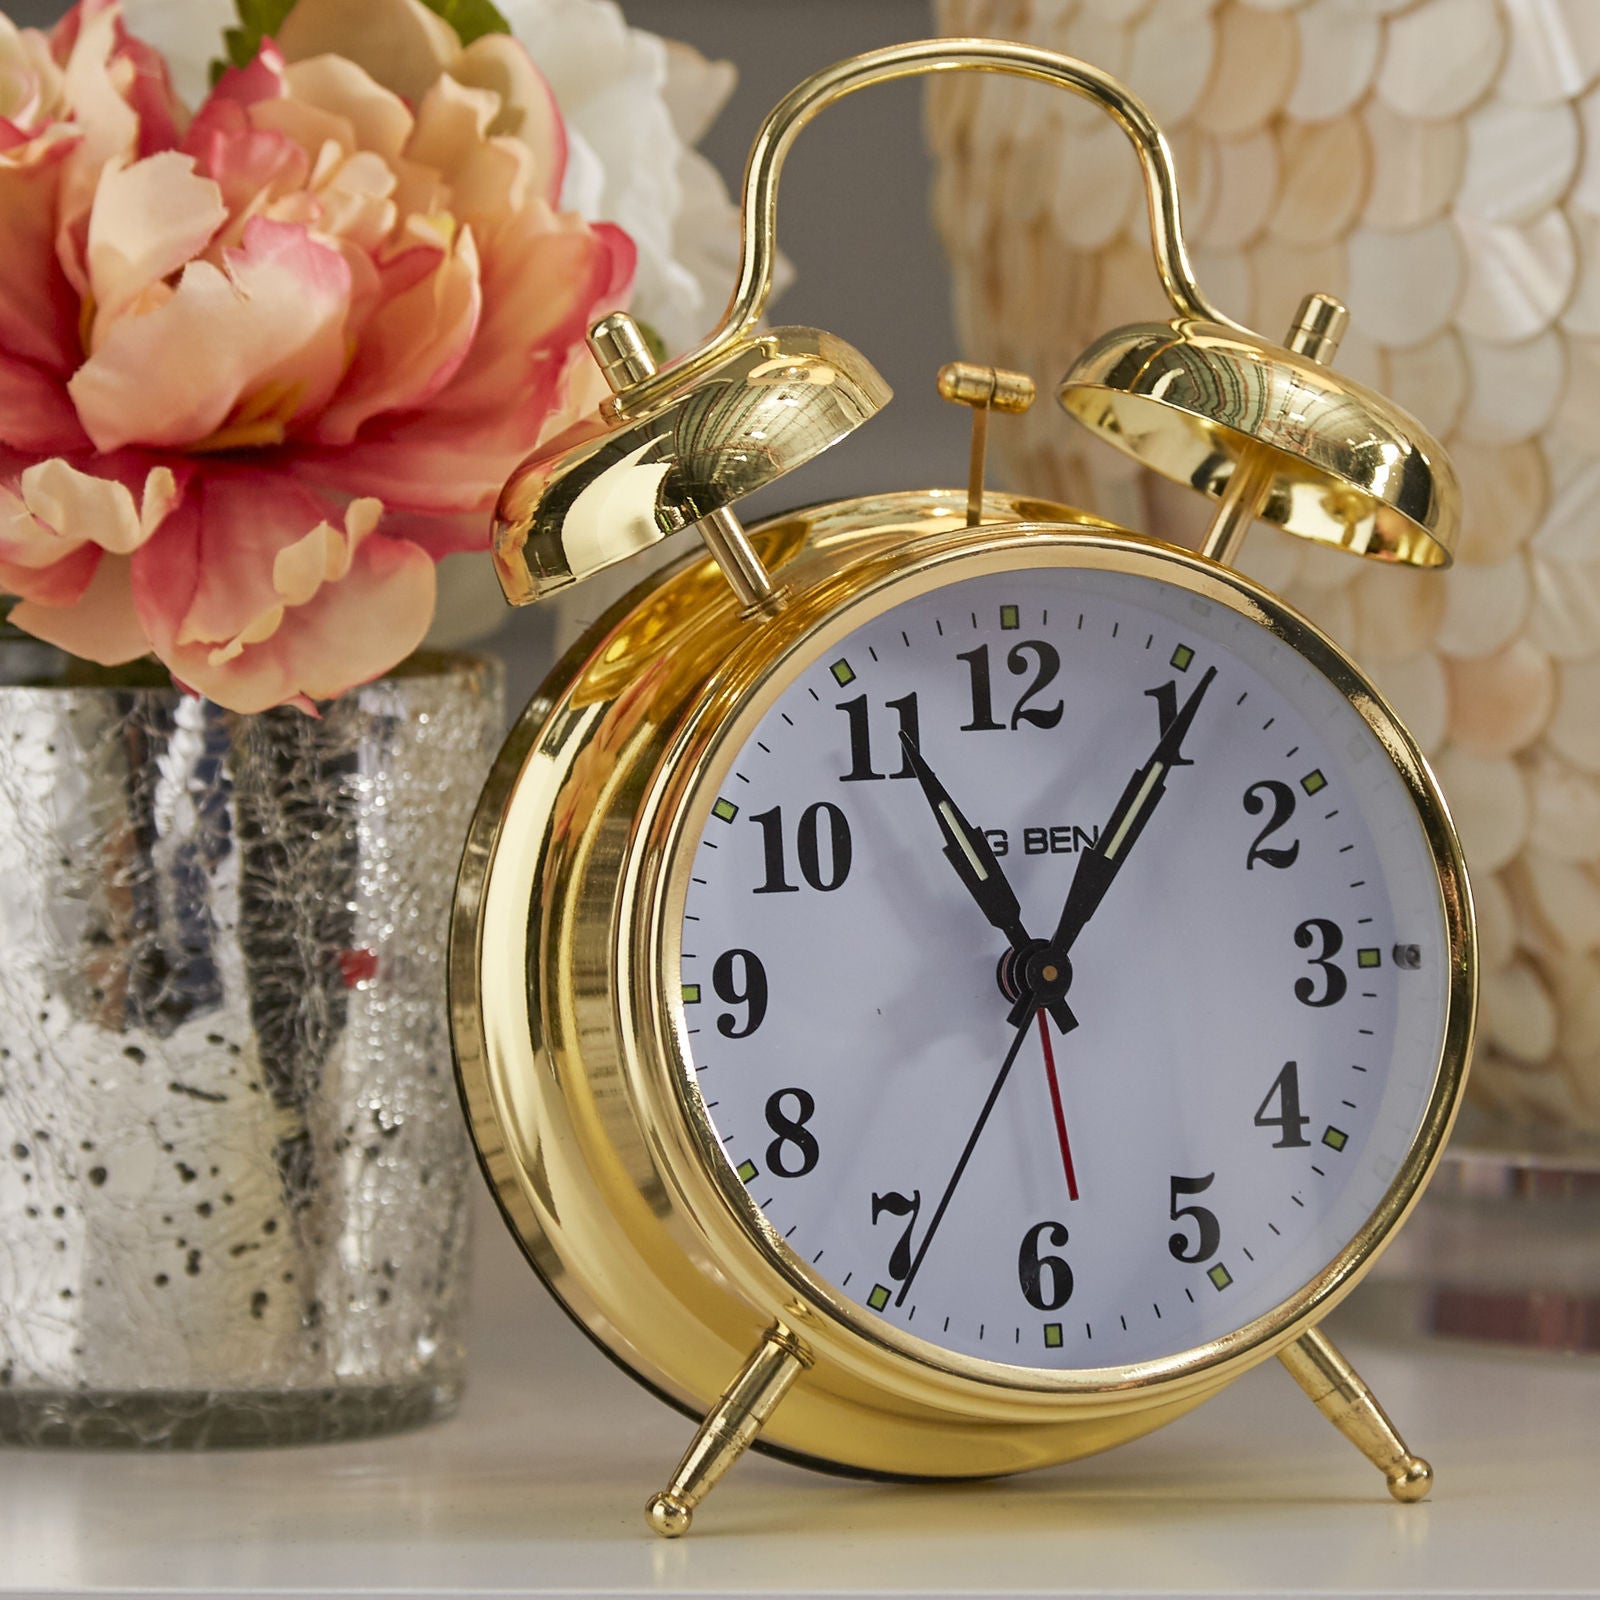 Golden Retro Style Alarm Kids Room Table Clock for Home and Office Decor-FunkyTradition